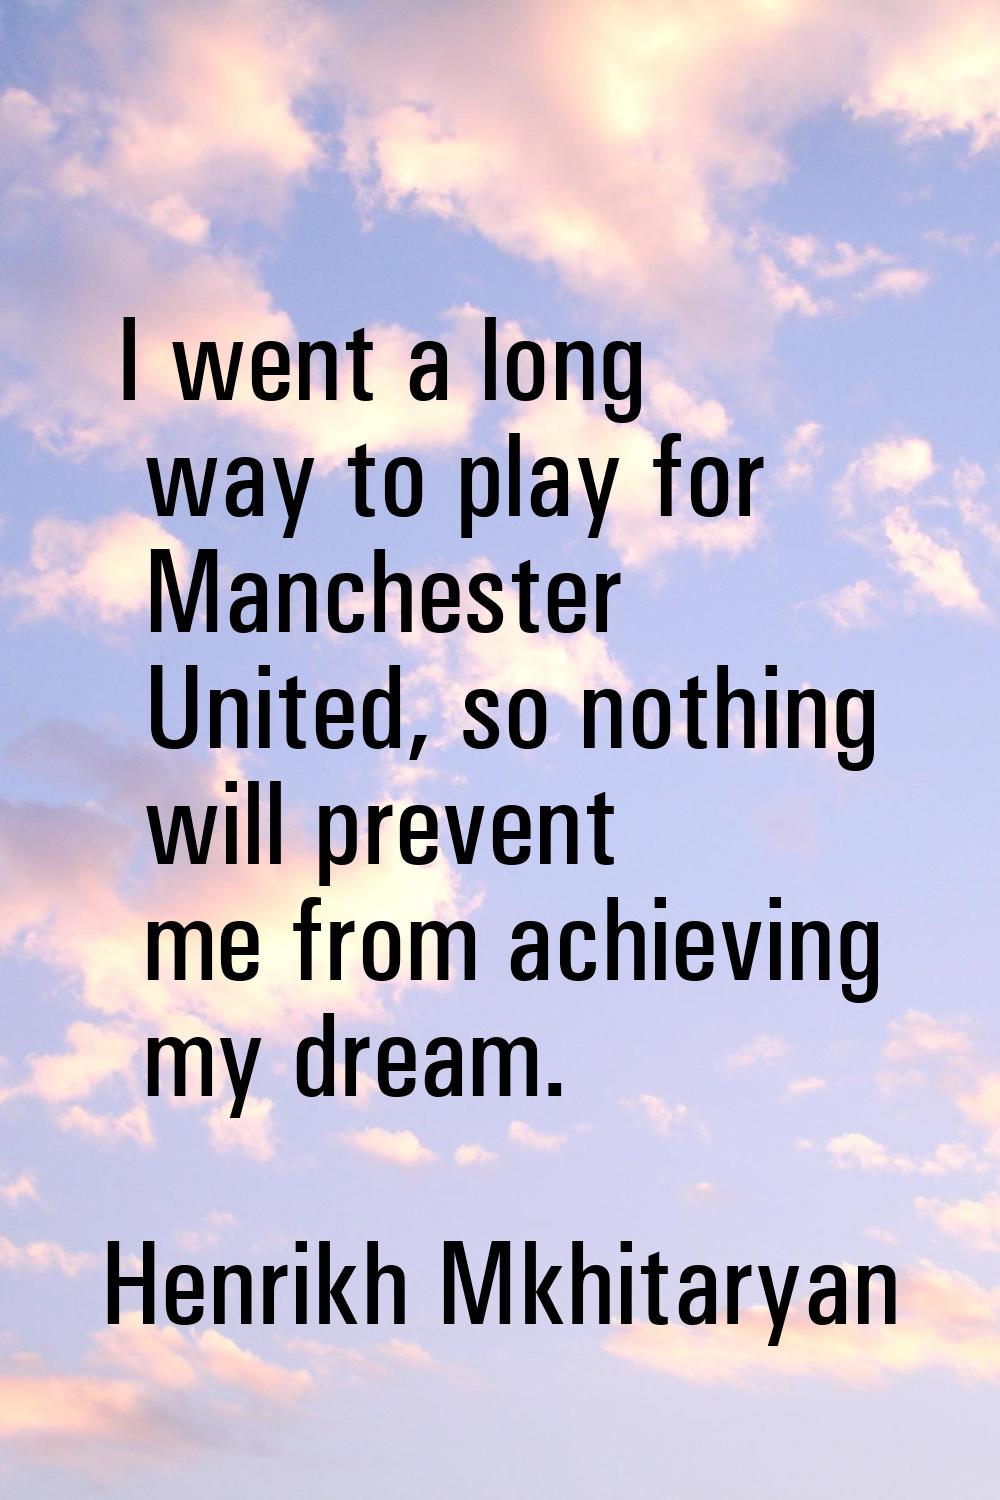 I went a long way to play for Manchester United, so nothing will prevent me from achieving my dream